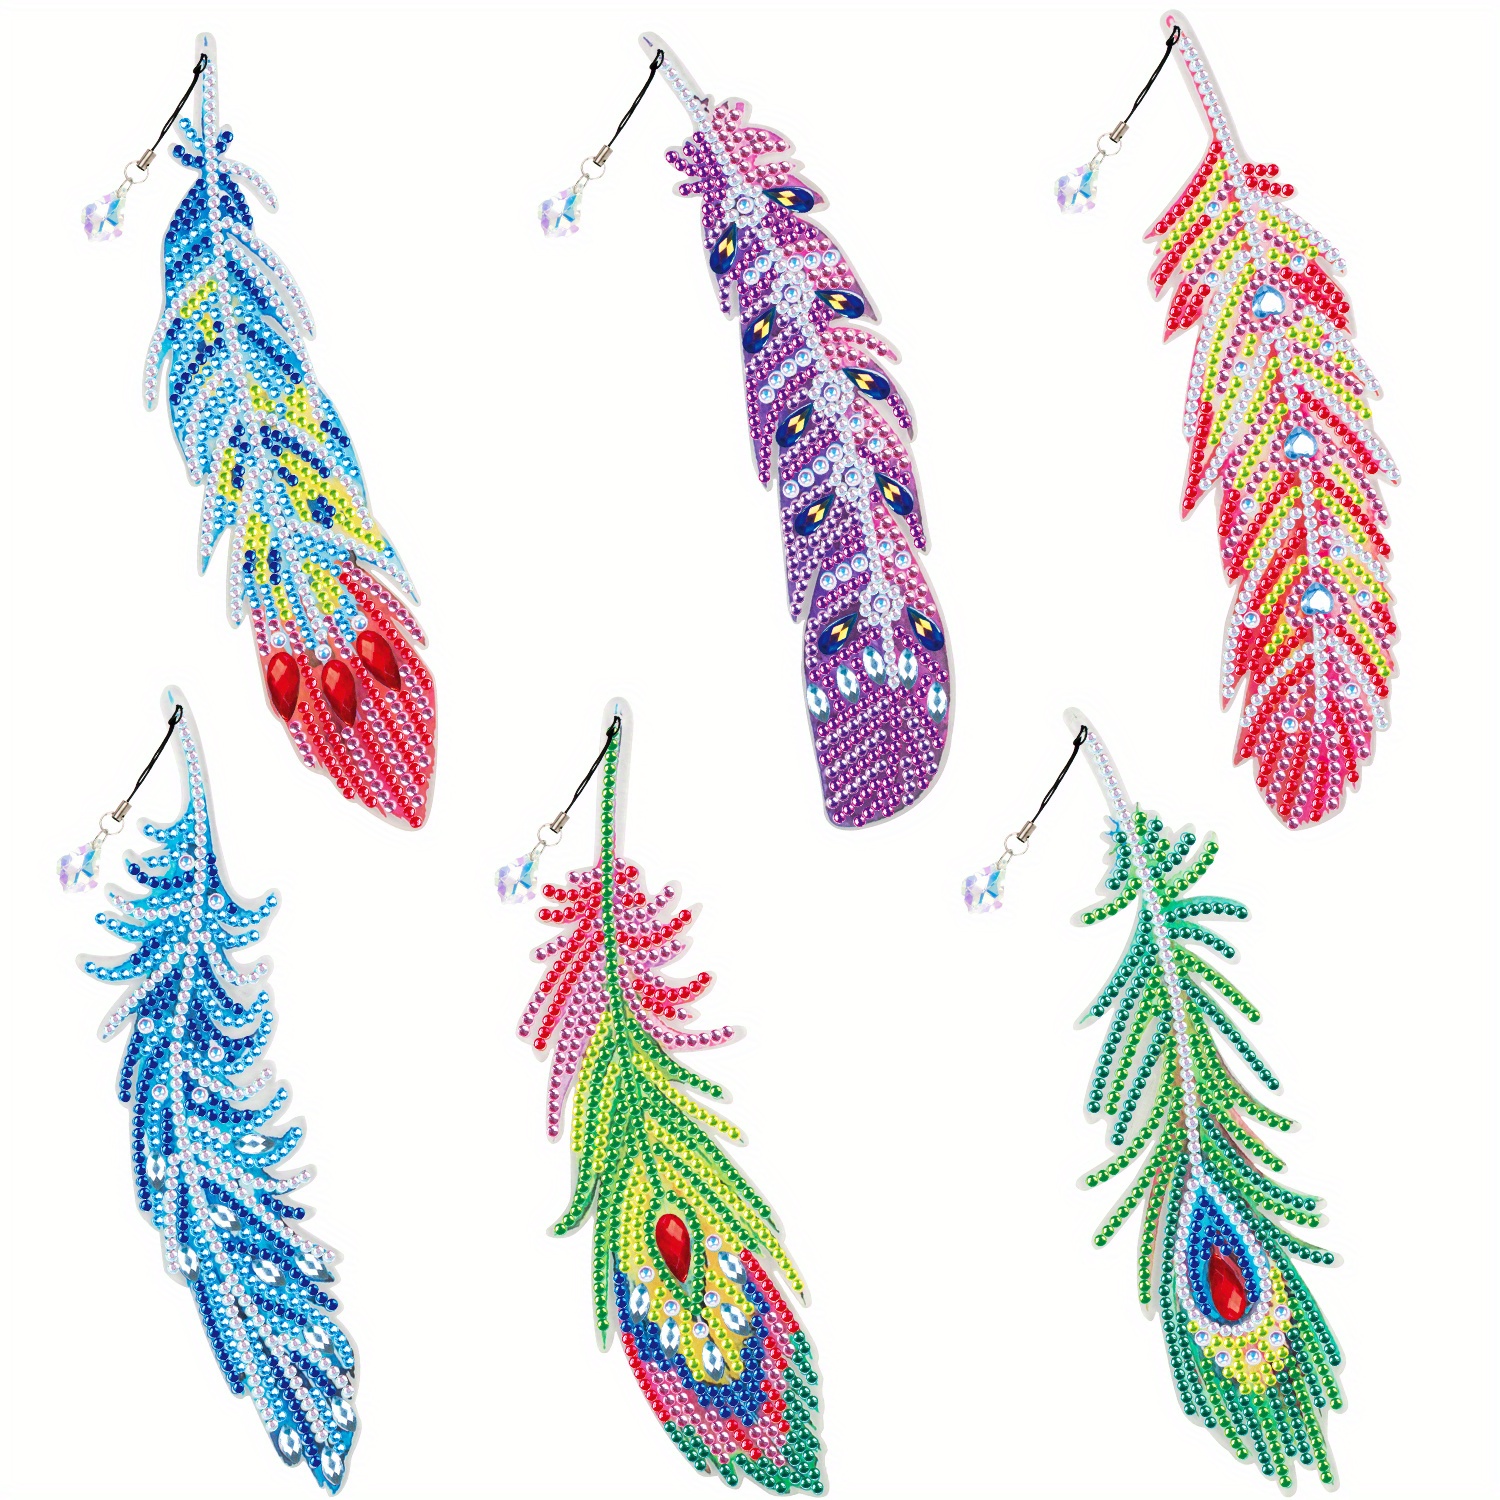 12 Pcs 5D Diamond Painting Bookmarks Kit DIY Feather Rhinestones Bookmark  for Kids Adults PVC Art Bookmarks with Crystal Pendant for Home Office